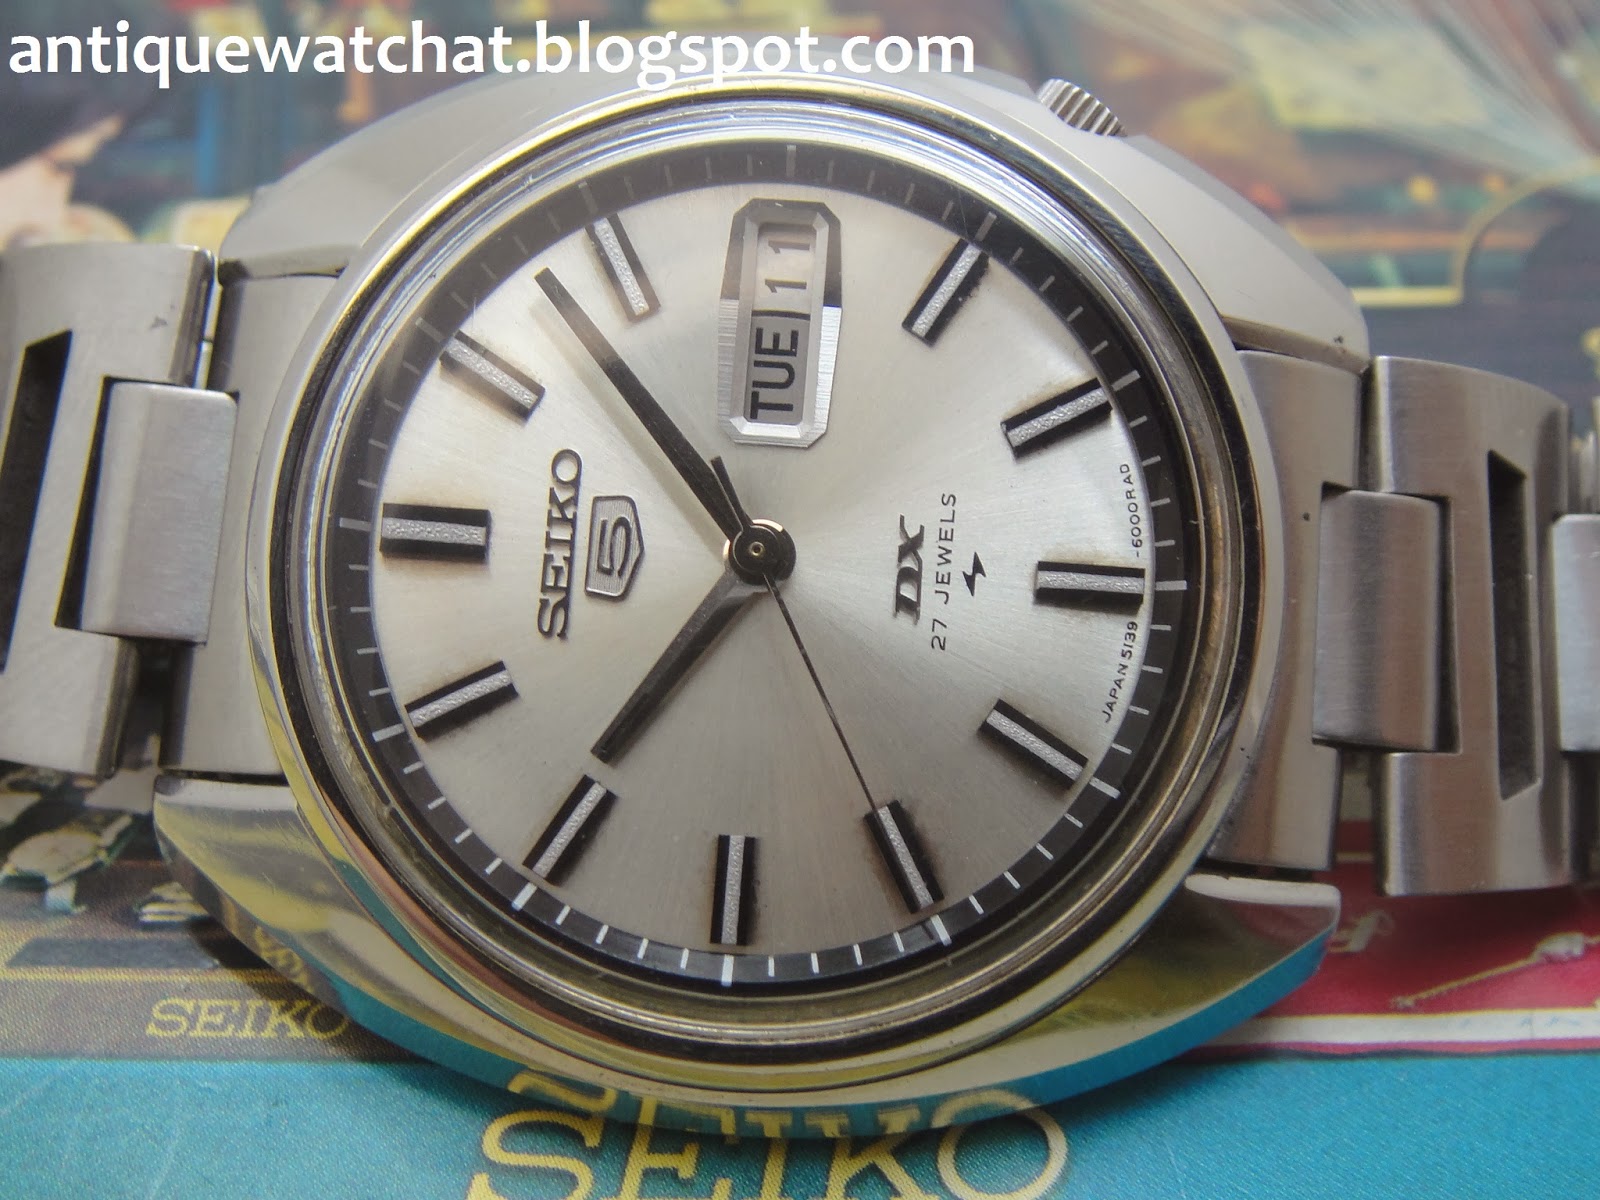 Antique Watch Bar: SEIKO 5 DX AUTOMATIC 5139-6000 S5A47 (SOLD)